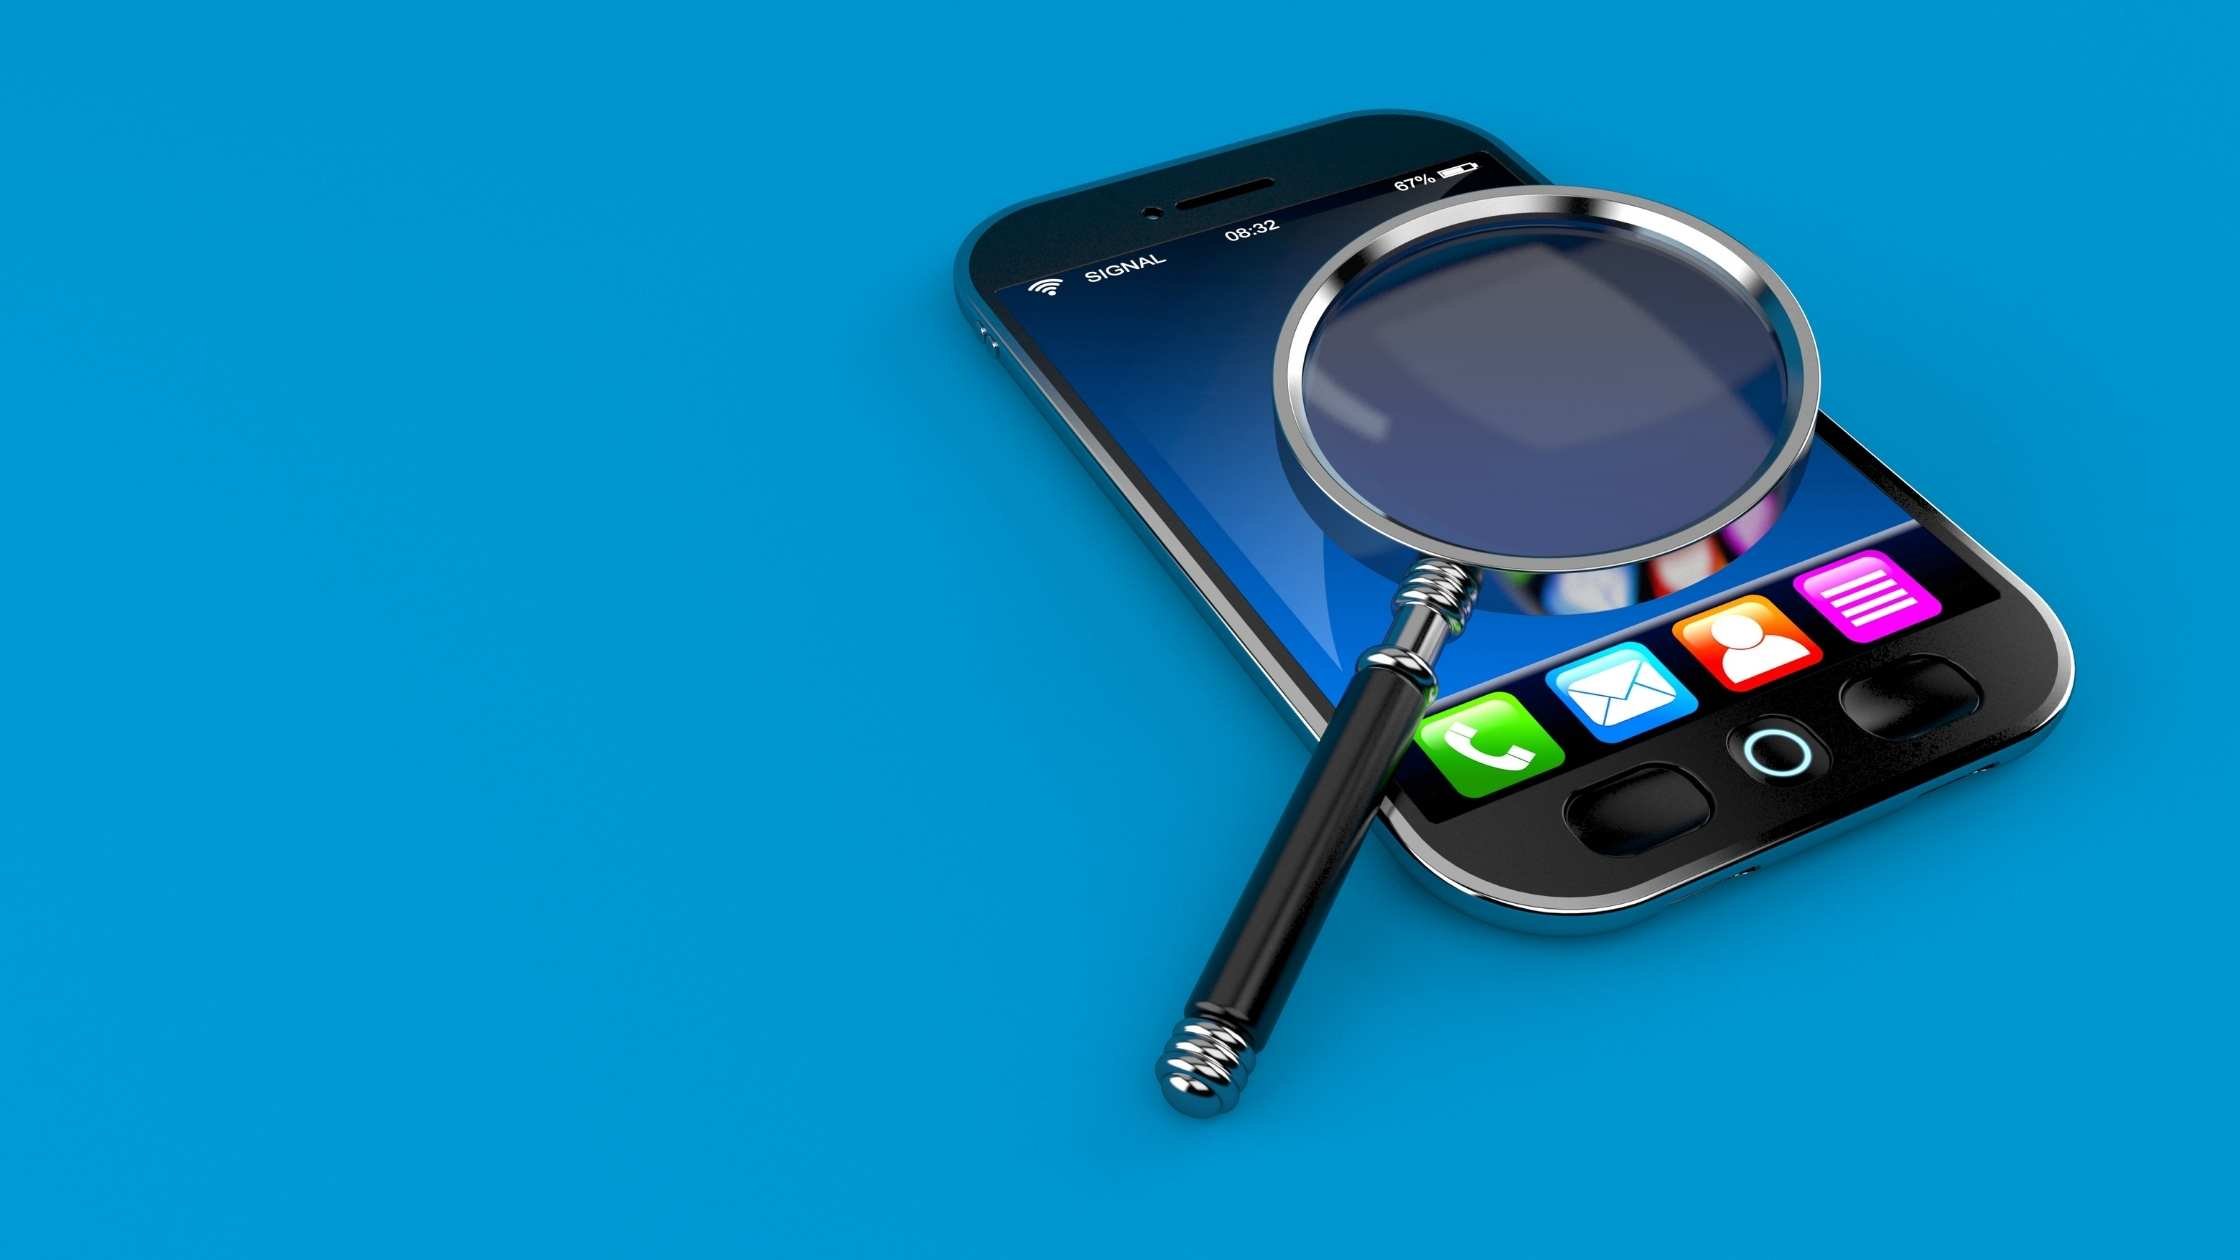 Magnifying glass on a mobile phone